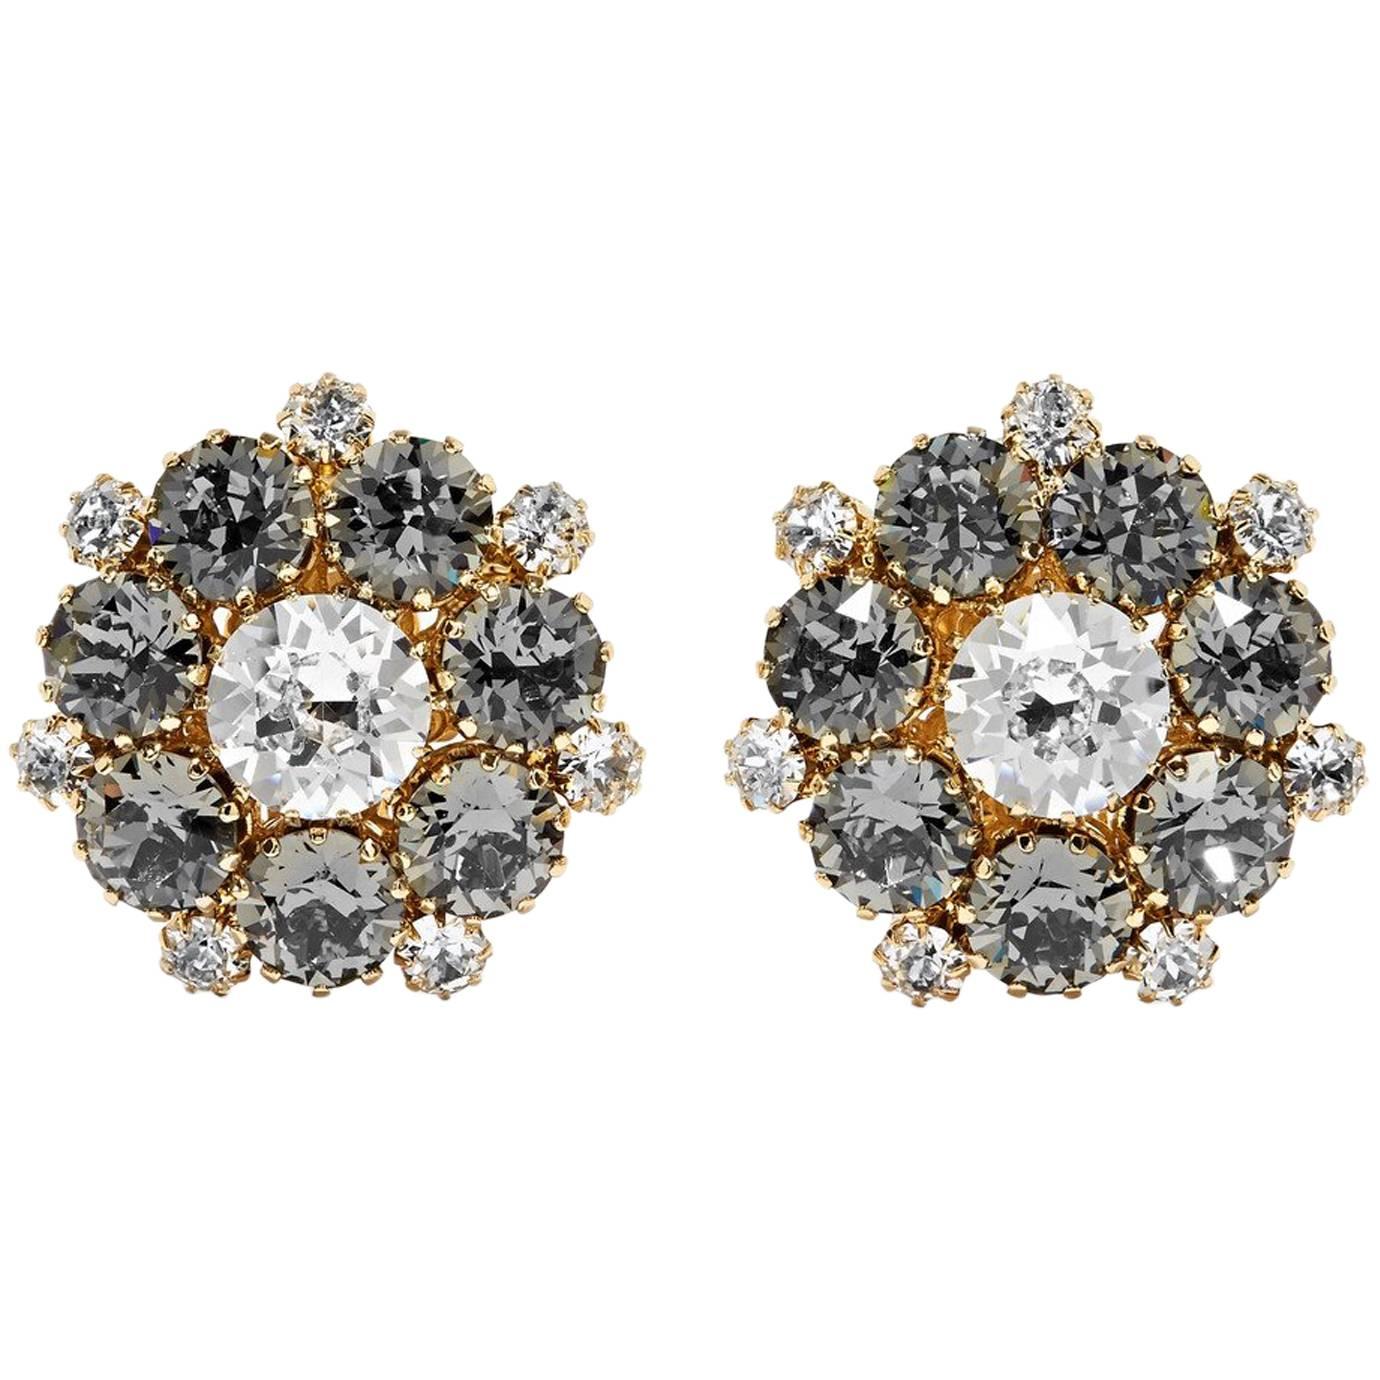 Dolce & Gabbana NEW & SOLD OUT Gunmetal Crystal Starburst Evening Stud Earrings